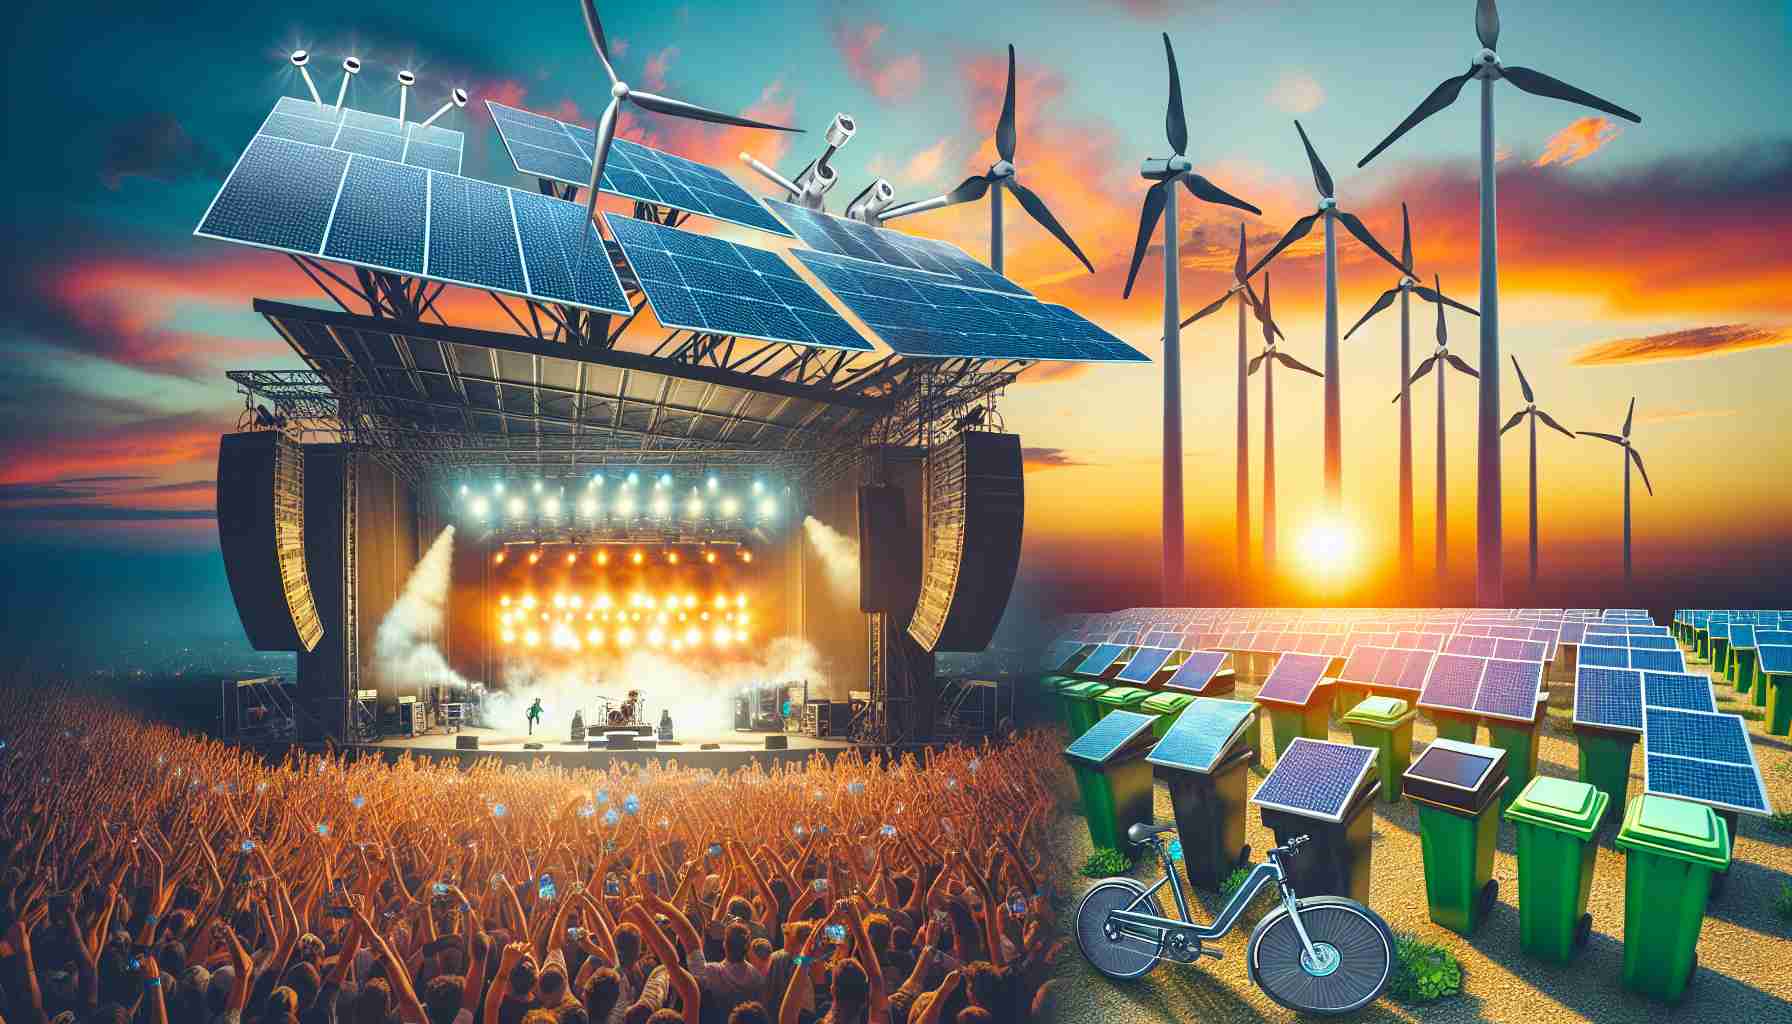 Create a visually stunning, high-definition photograph that represents new and innovative energy solutions being utilized at music events. These can include solar panels powering the concert's sound and light systems, wind turbines in the background, attendees charging their phones at pedal-powered charging stations, e-vehicles being used for transportation, and compost bins for biofuel production. Set the scene at sunset with the vibrant hues of the day bleeding into the calmness of the evening, accentuating the stark contrast between the bombastic energy of the concert and the sustainable practices in place.